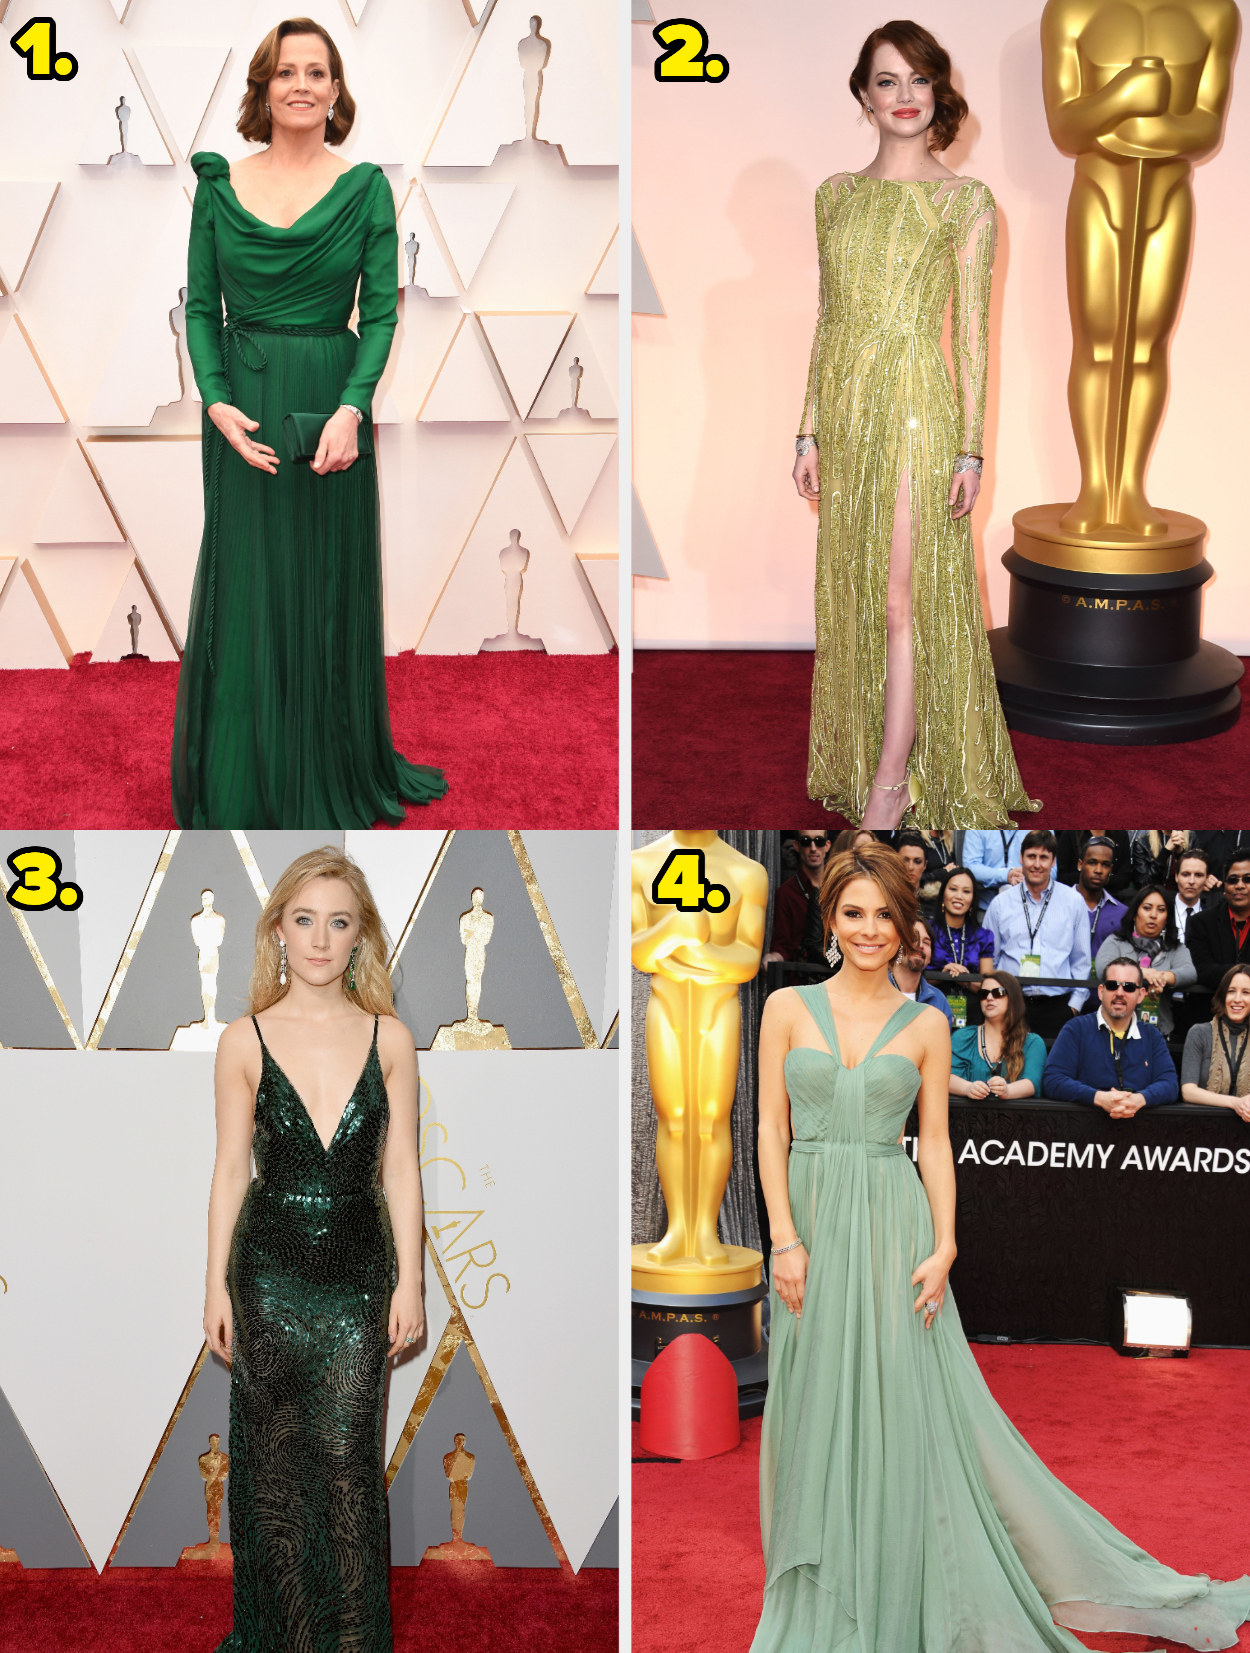 1. Sigourney Weaver wears a longsleeved gown with draping. 2. Emma Stone wears a longsleeved gown with a deep slit and is covered in jewels. 3. Saoirse Ronan wears a v-neck shimmering gown. 4. Maria Menounos wears a draped halter gown